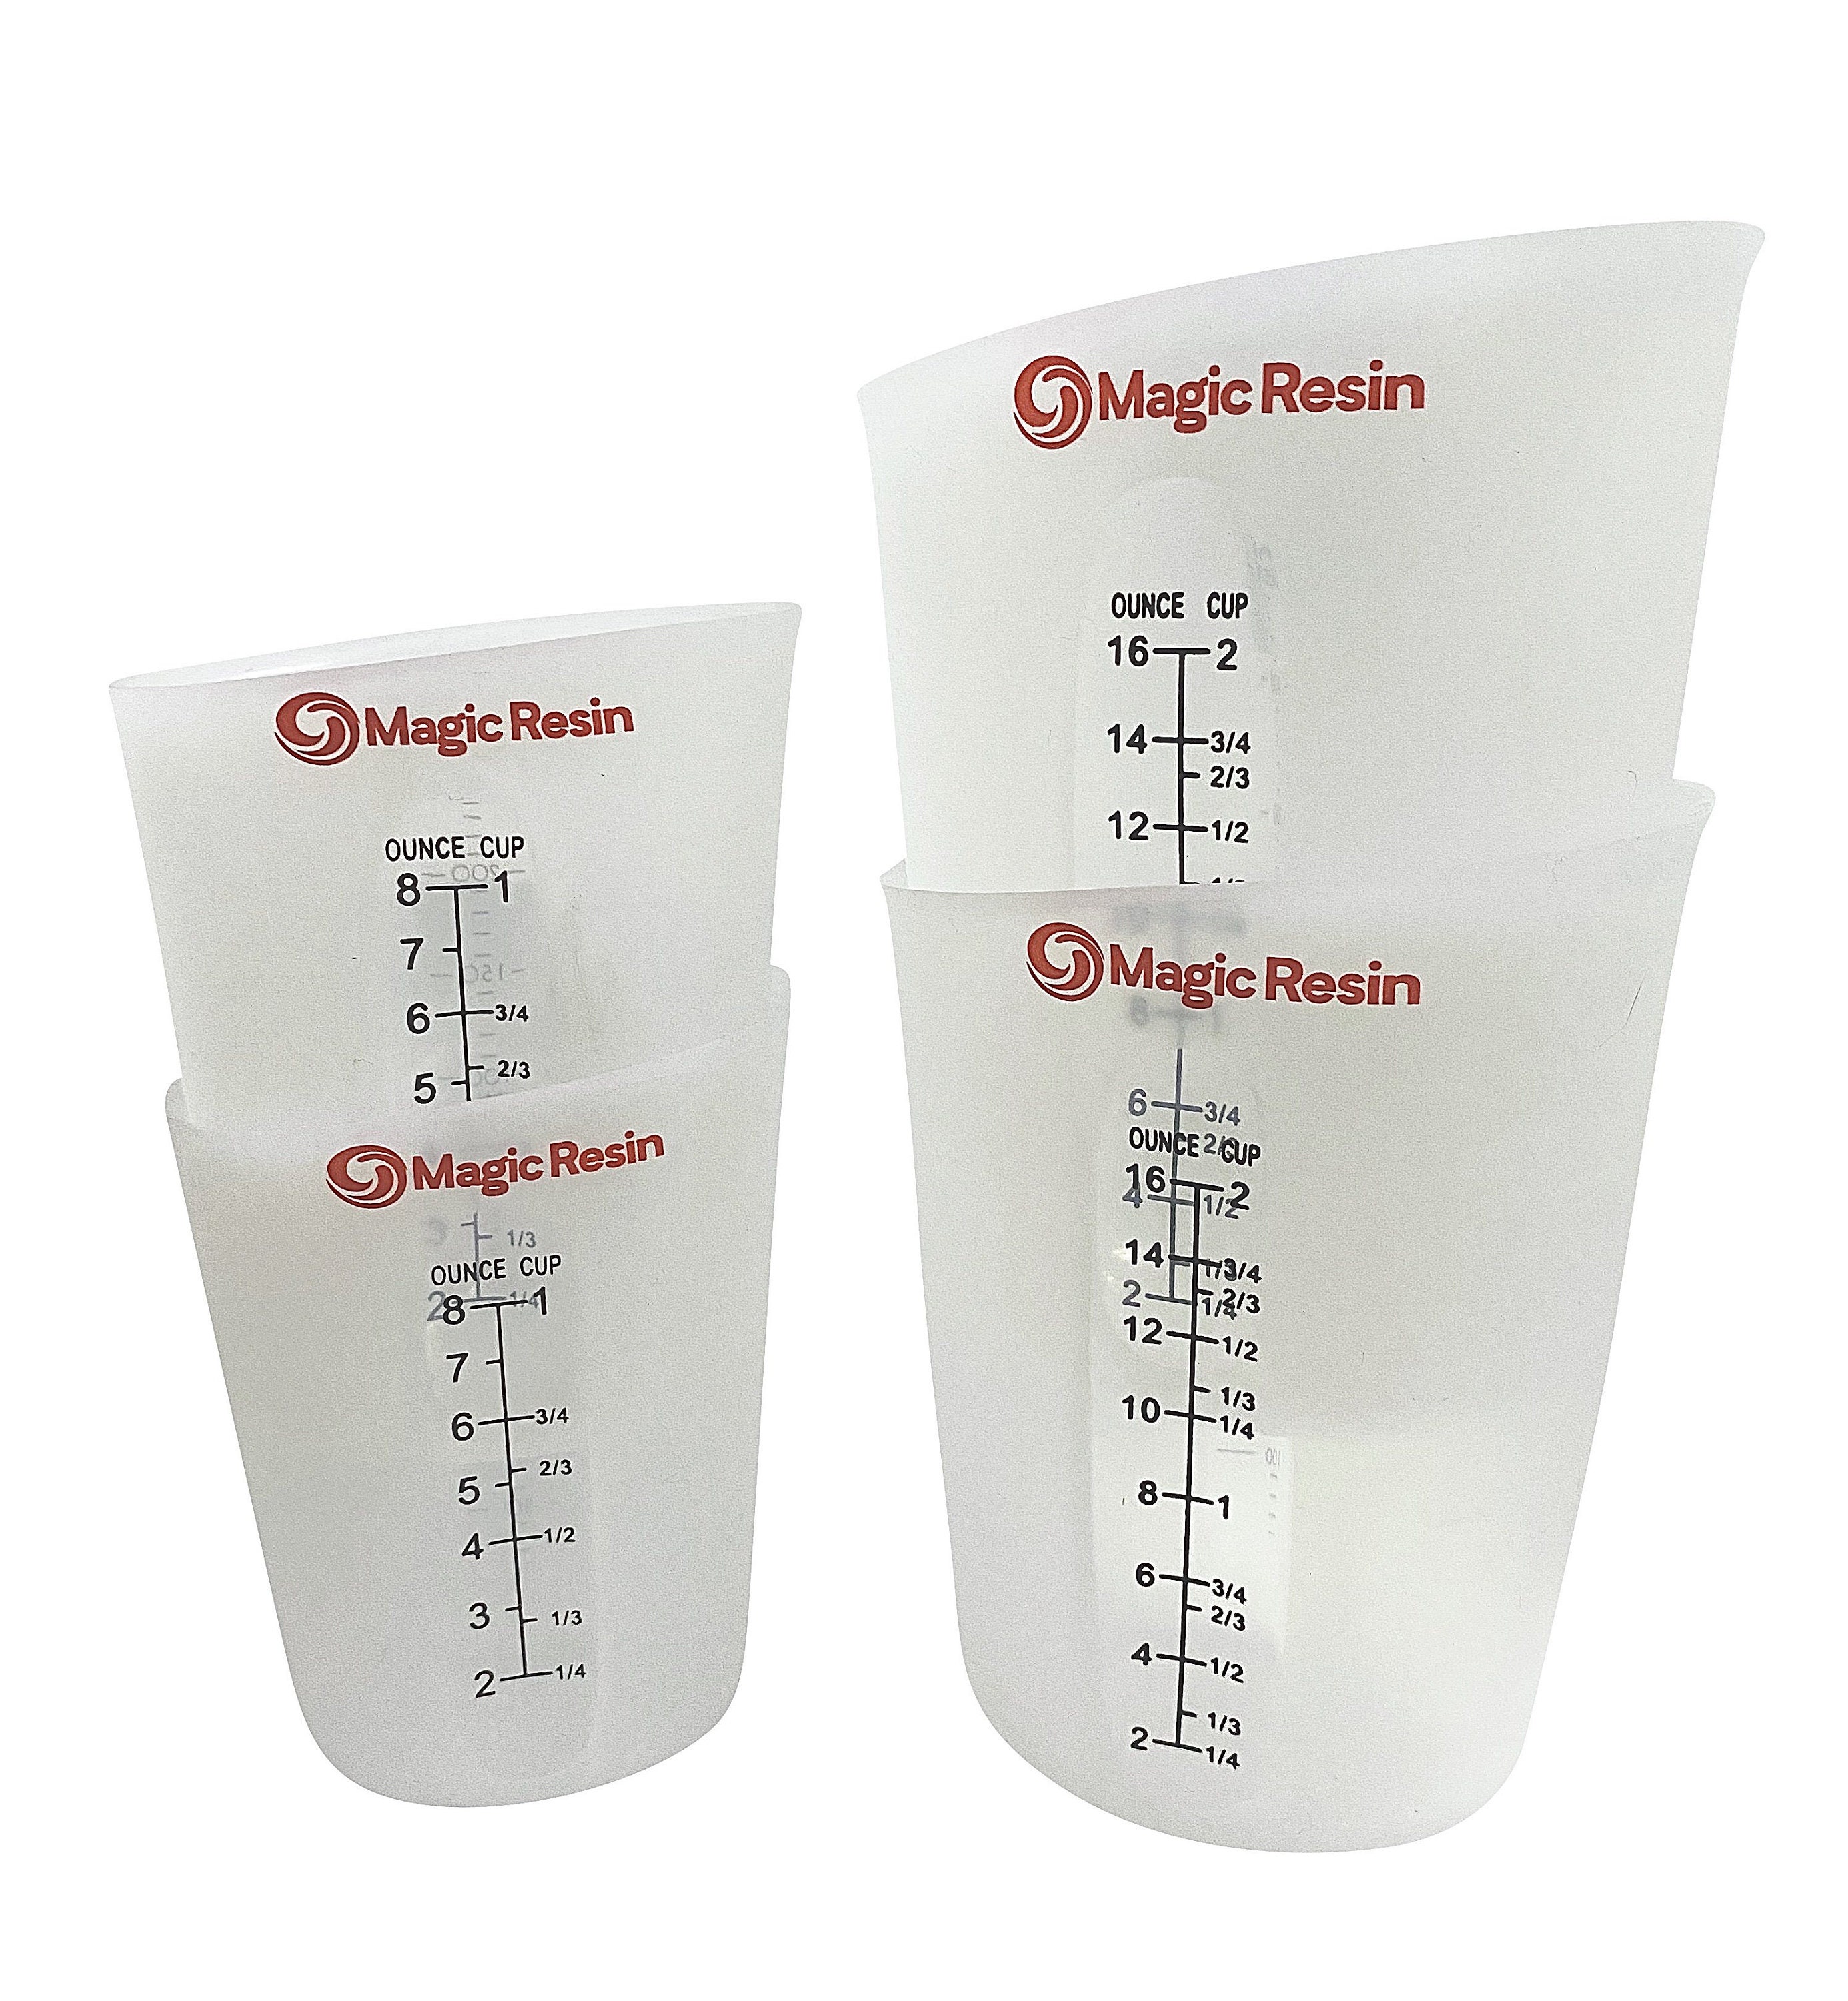 Disposable Measuring Cups For Resin - 20x Pixiss 10 Ounce Graduated Mi —  Grand River Art Supply